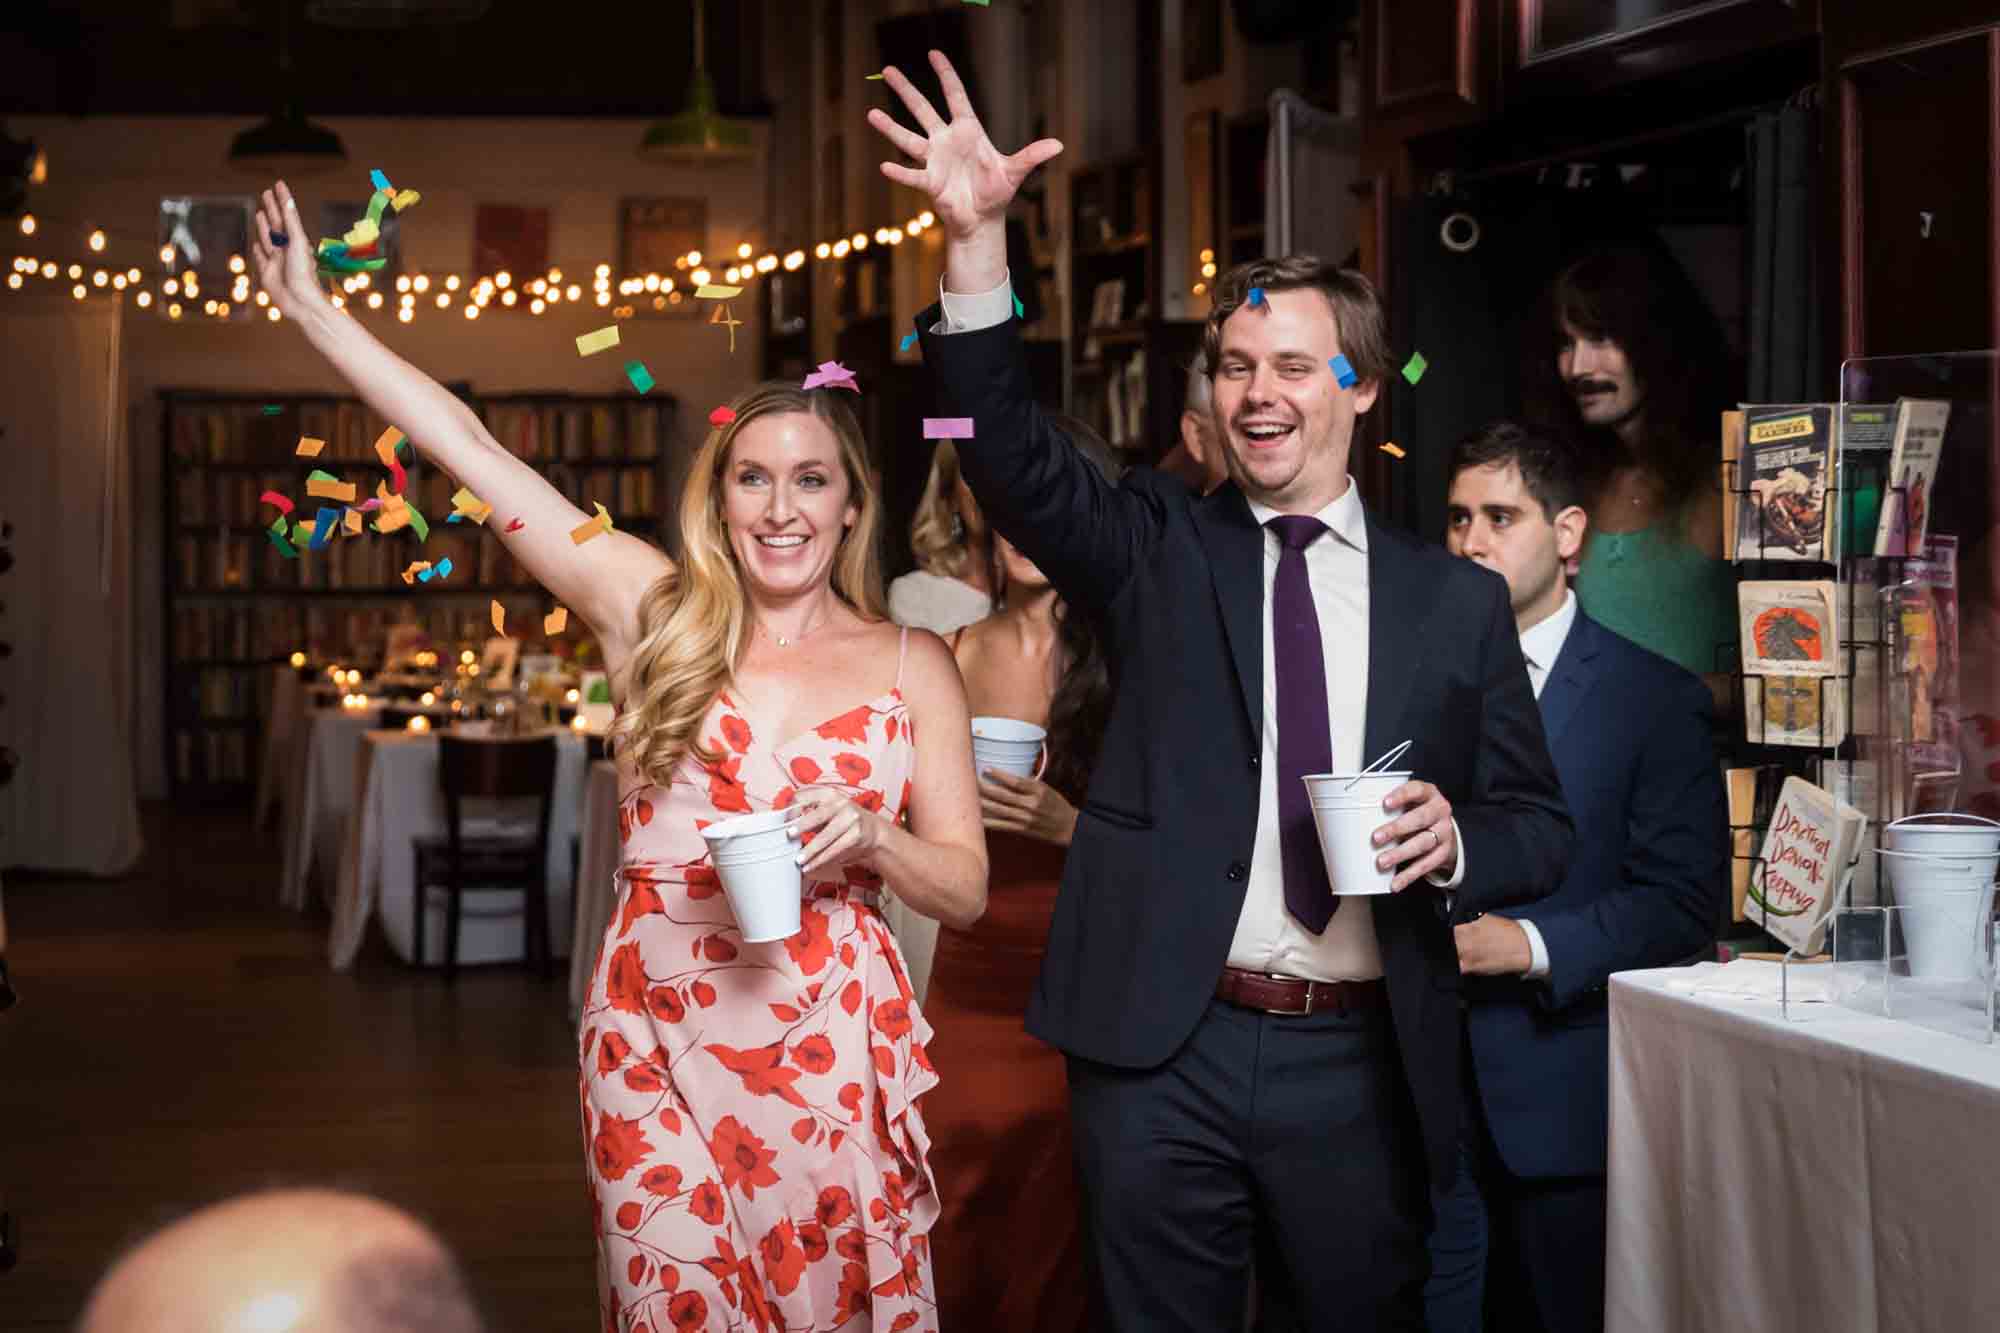 Guests walking down aisle throwing colorful confetti in the air at a Housing Works wedding